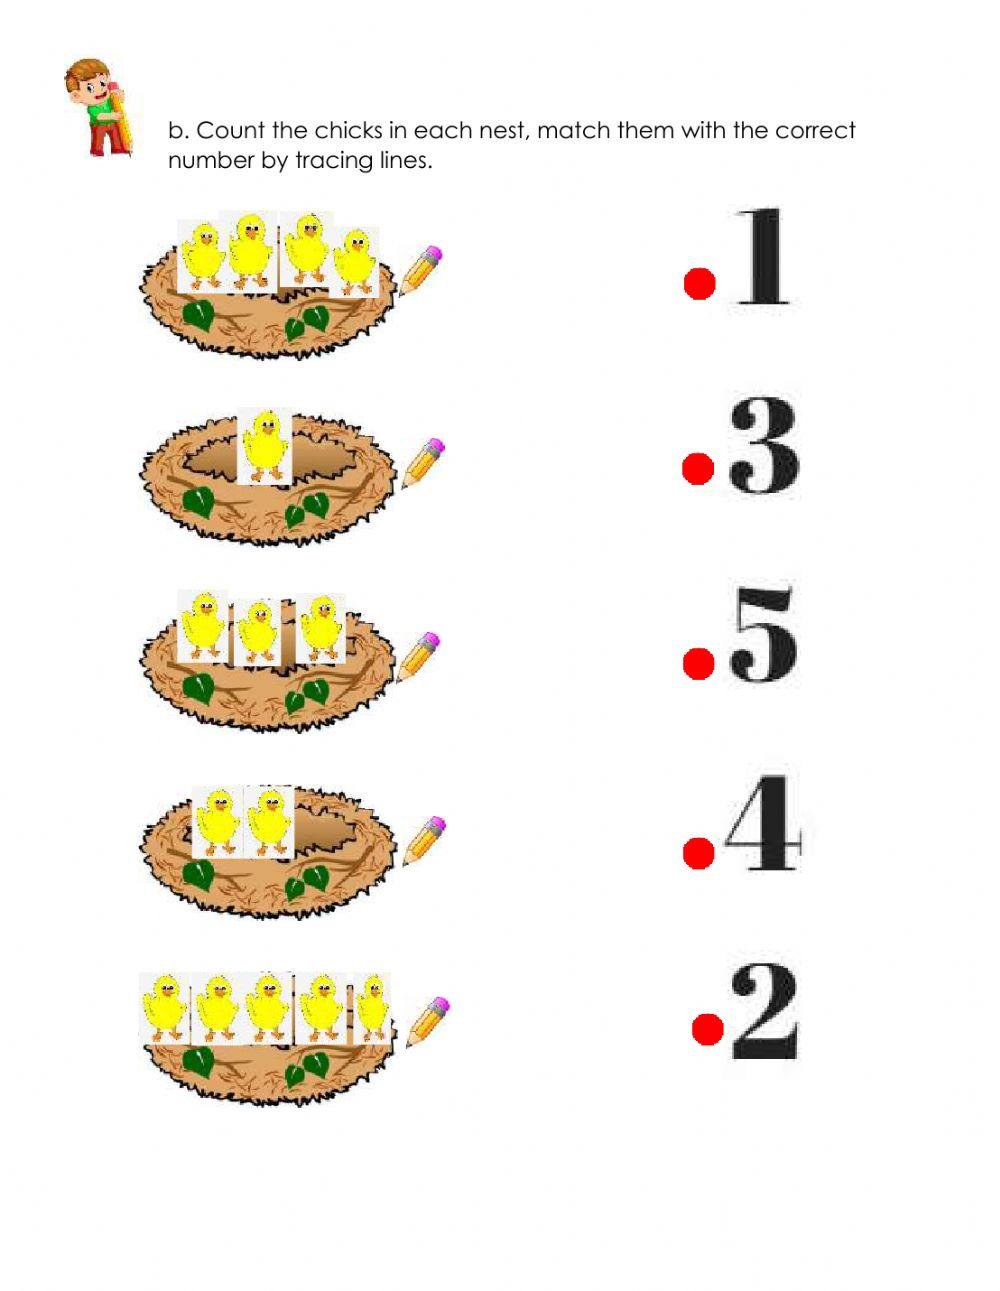 Identify numbers from 1 to 5.